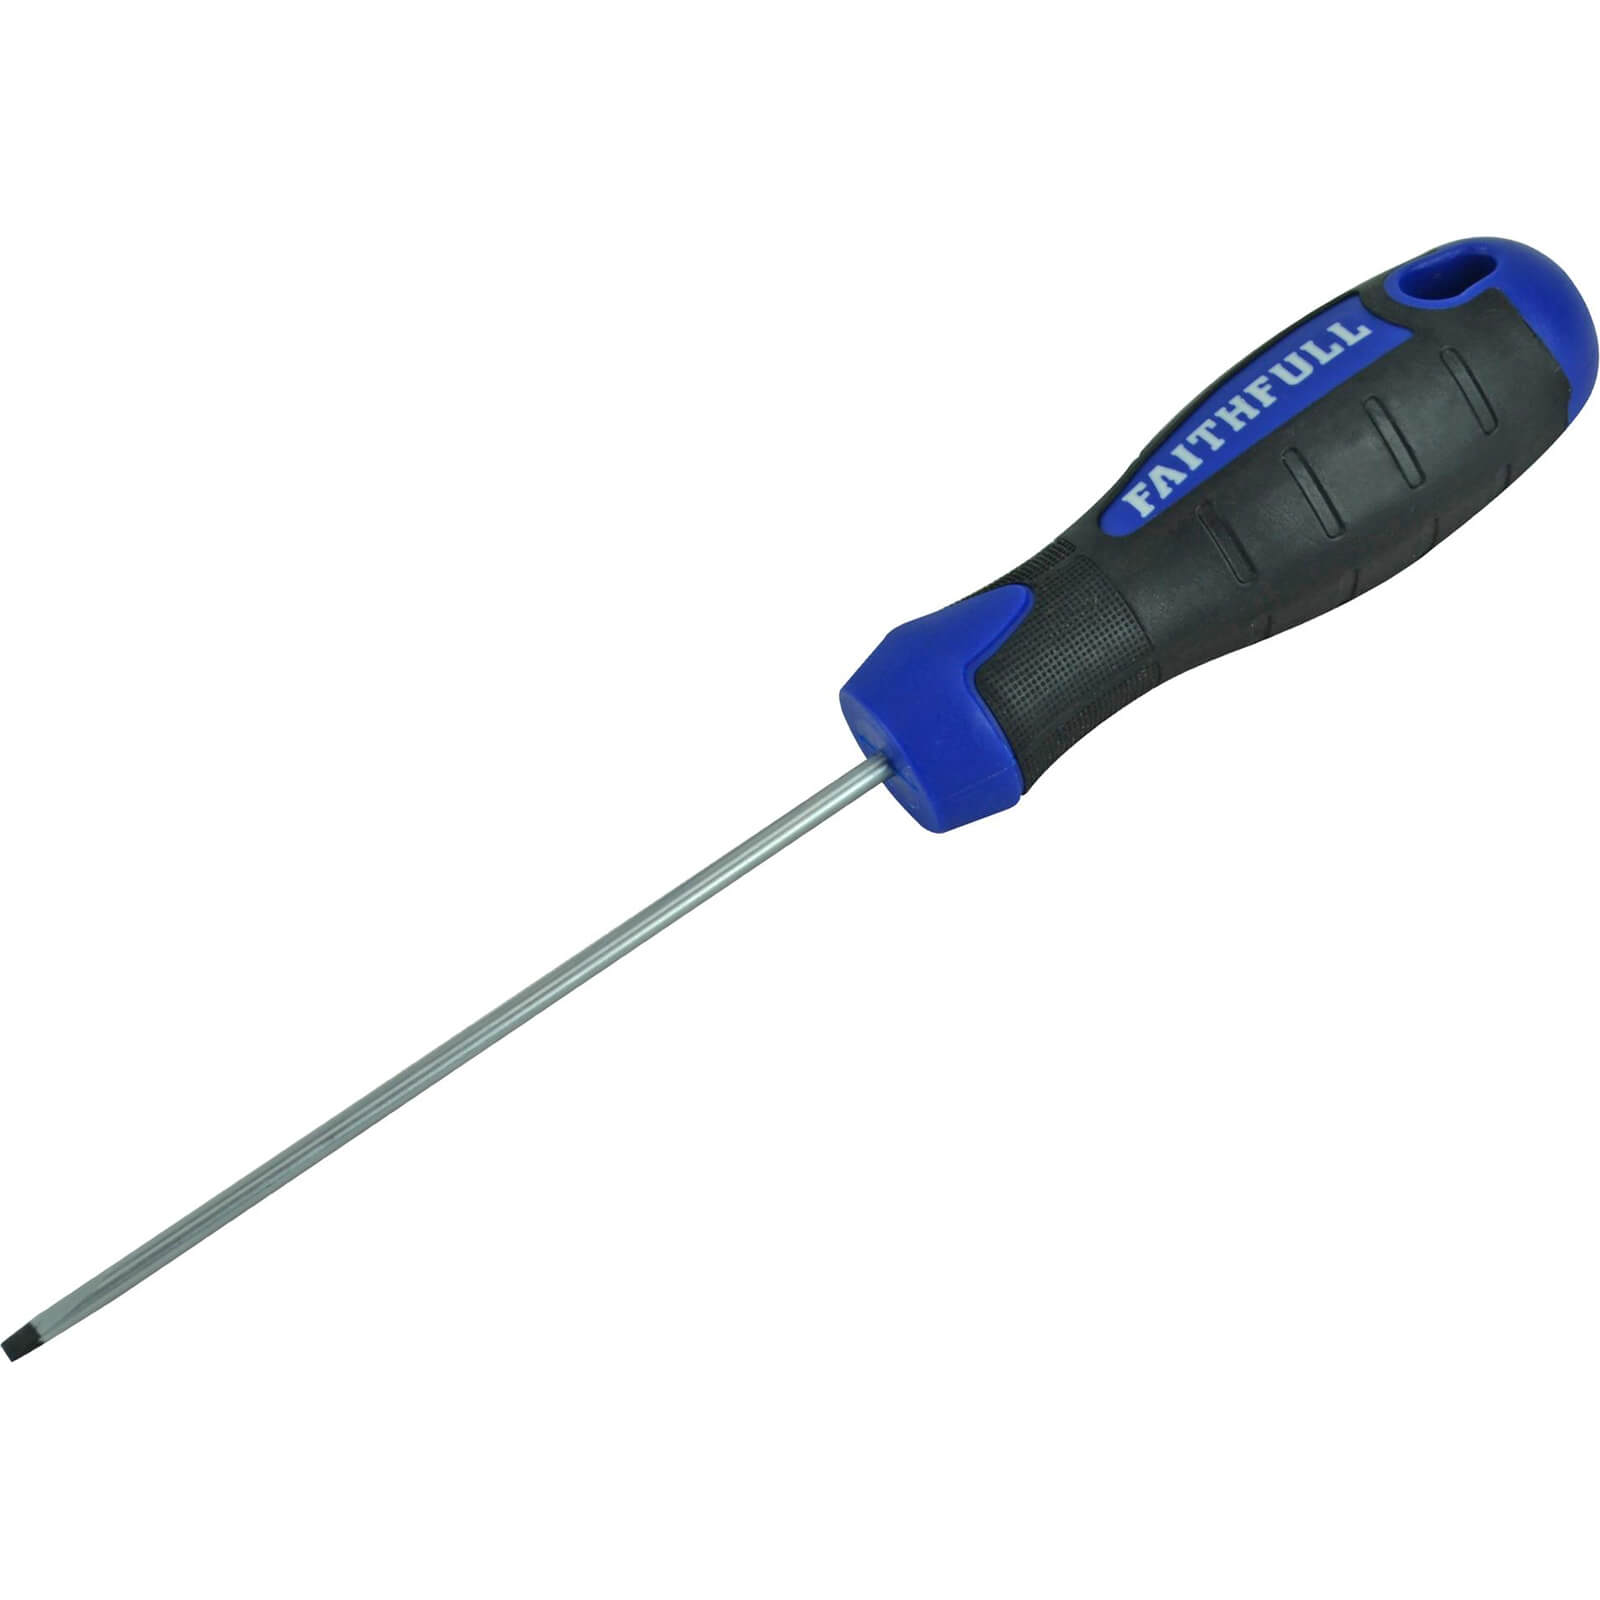 Faithfull 100 x 5.5mm Soft Grip Flared Slotted Screwdriver